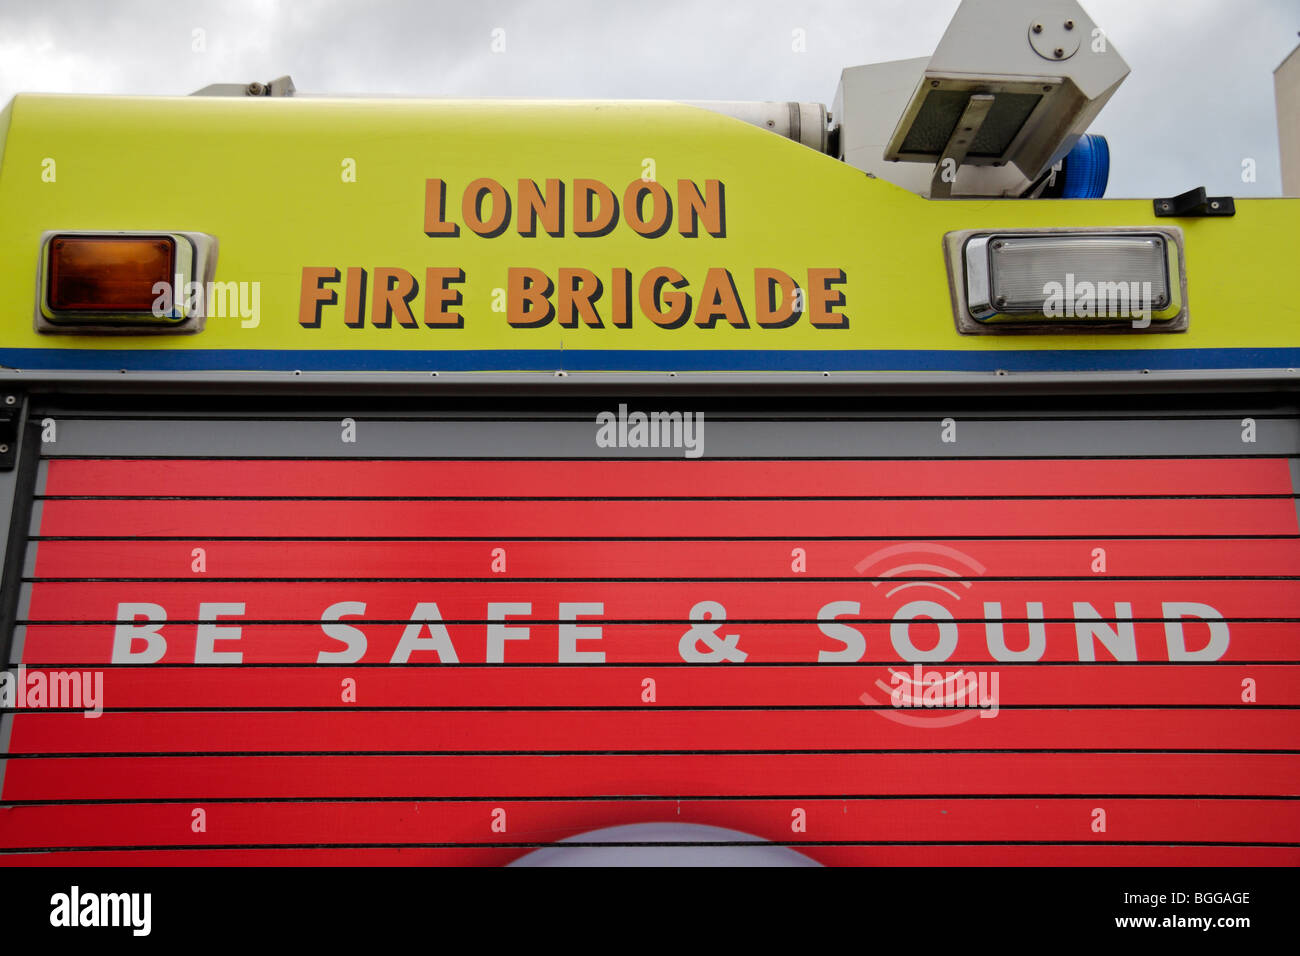 Close up of a roller doored cabinet on the side of a London Fire Brigade with a 'Be Safe & Sound' campaign advert. Stock Photo